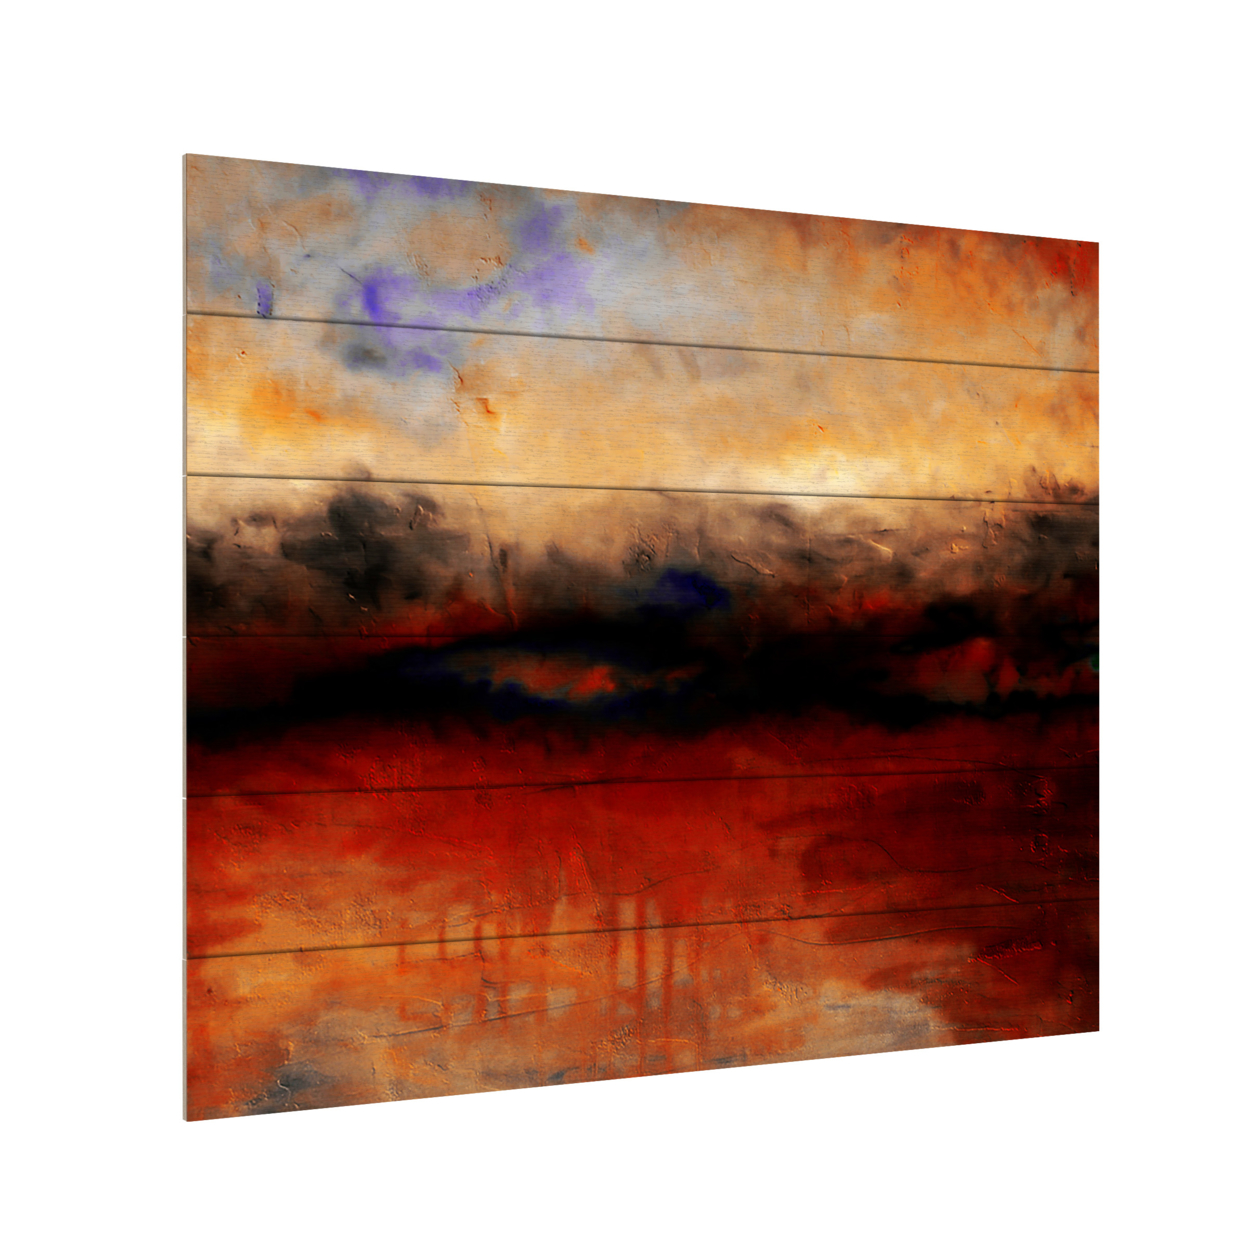 Wooden Slat Art 18 X 22 Inches Titled Red Skies At Night Ready To Hang Home Decor Picture